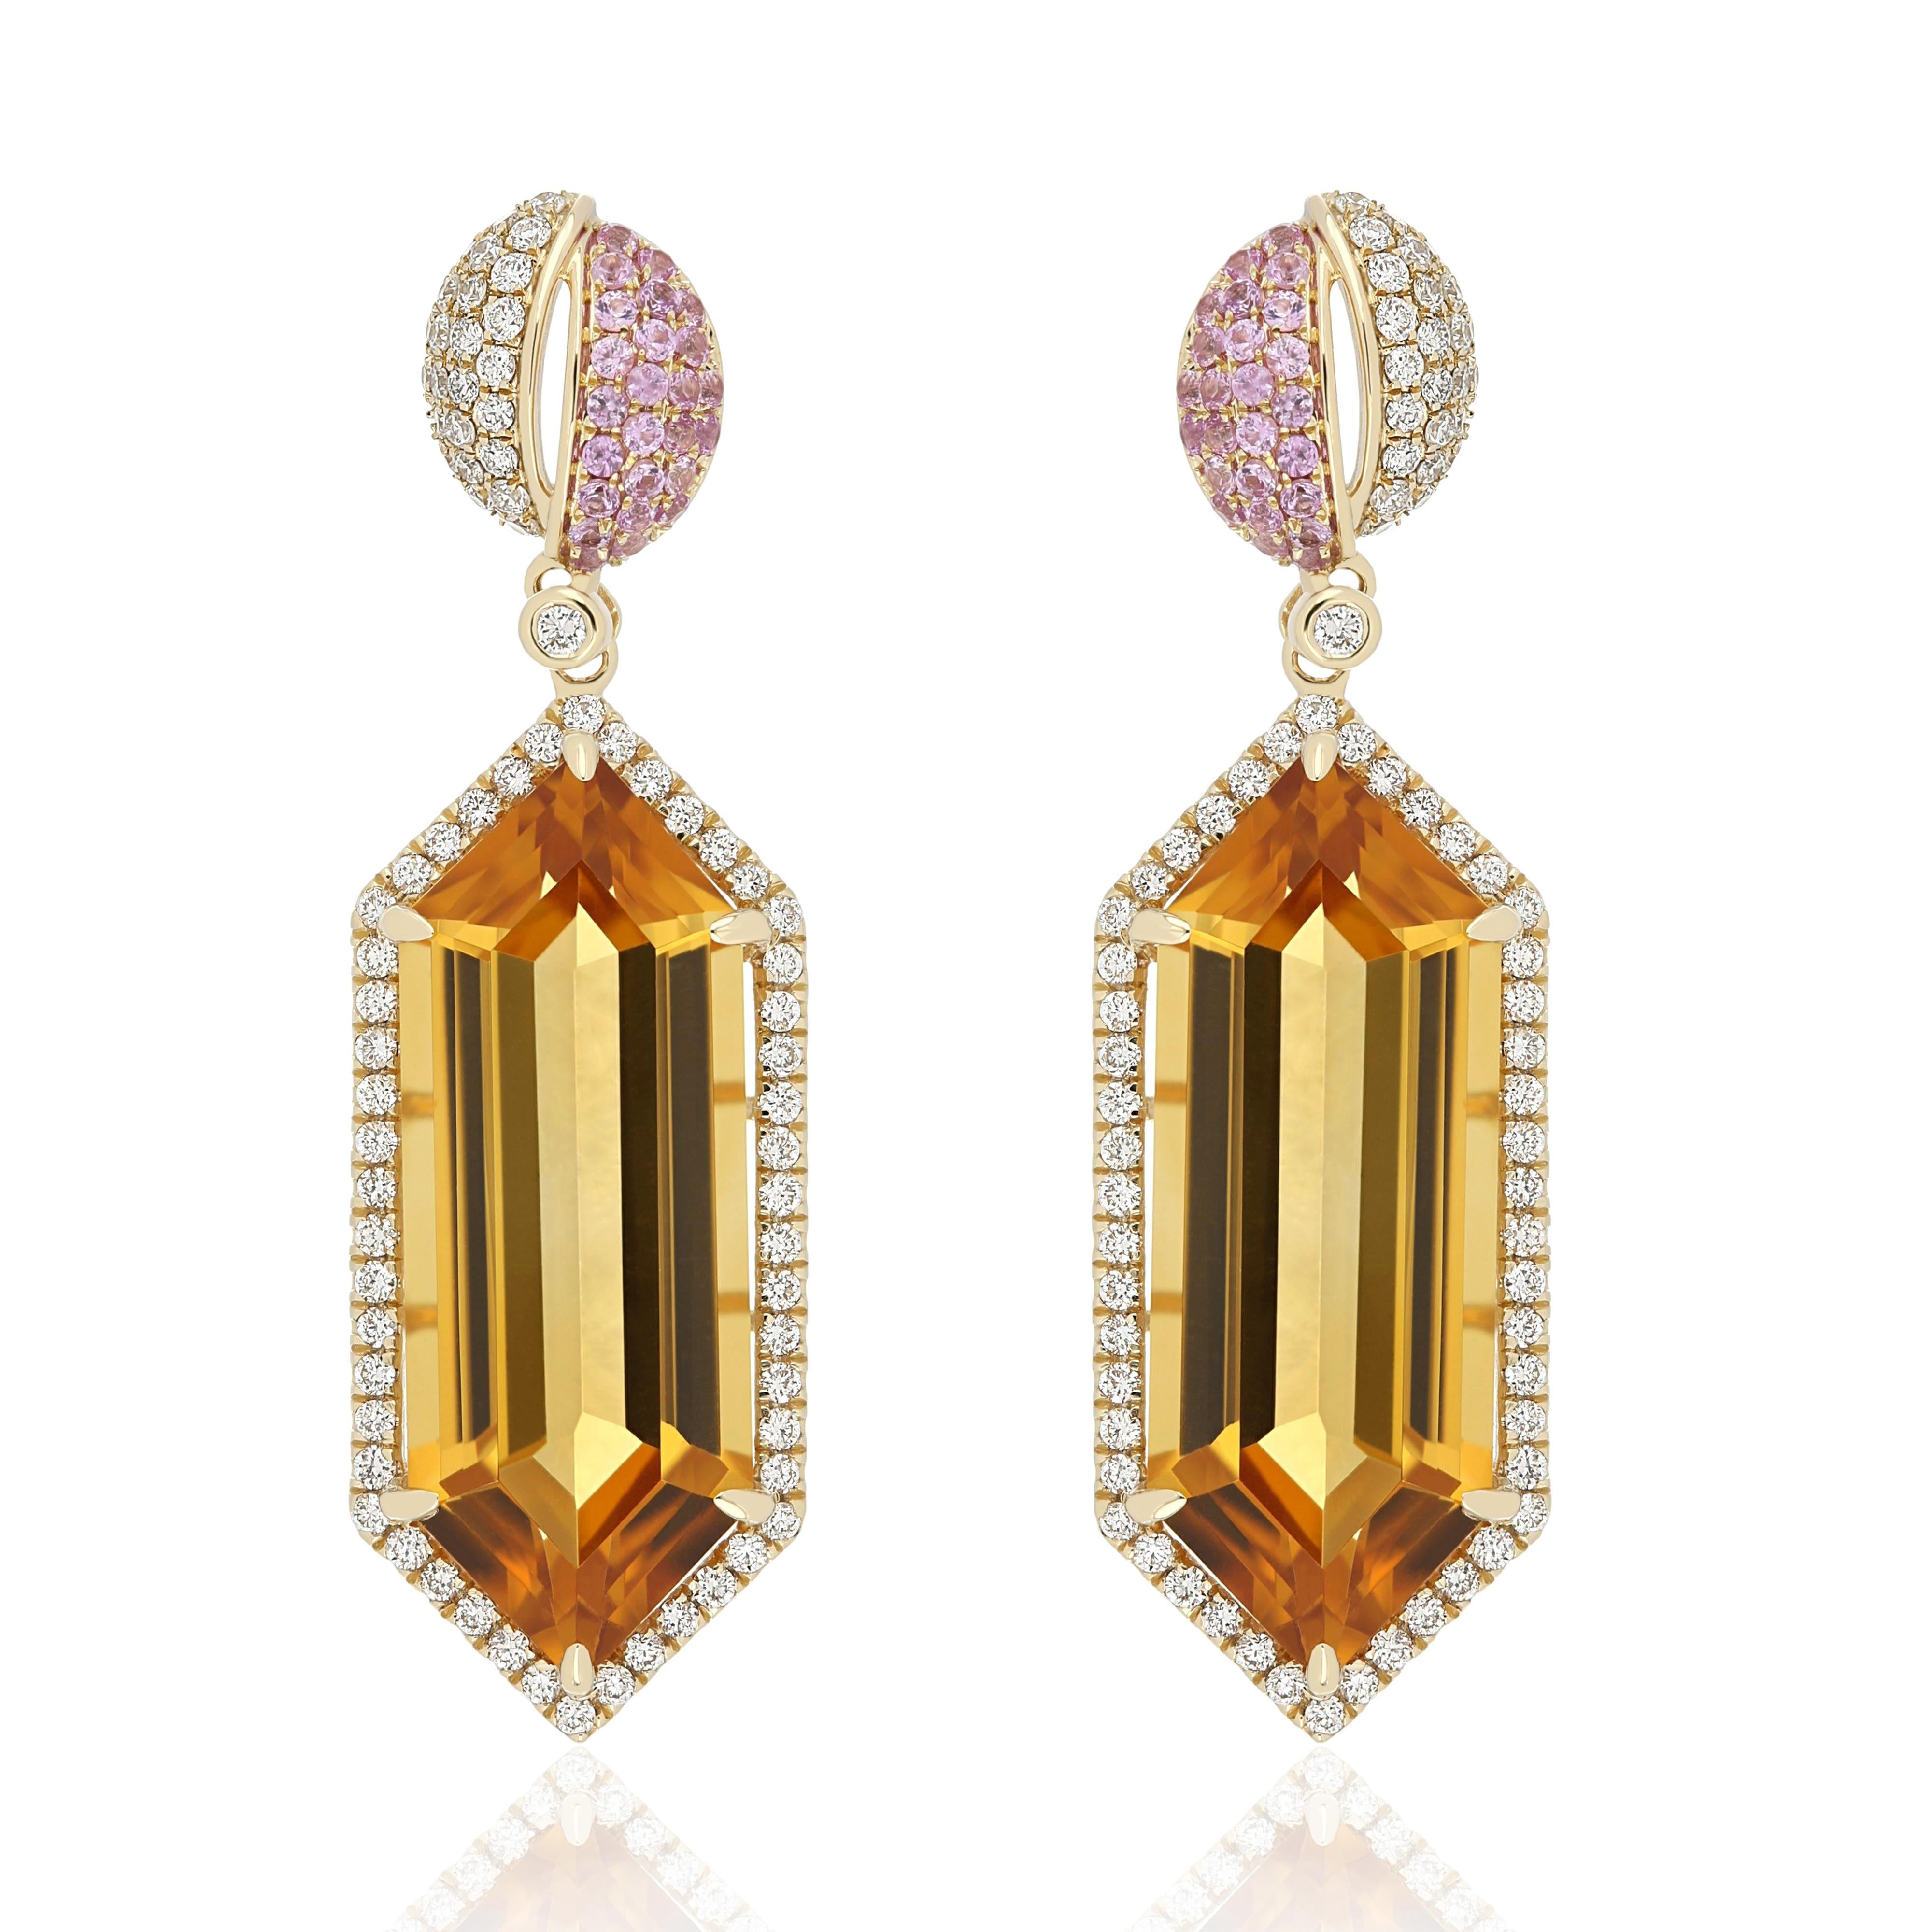 Elegant and exquisitely detailed 14 Karat Yellow Gold Earring, Center set with 13.60 CT's Hexagon Shape Citrine, Pink Sapphire with 0.30 CT's and Surrounded micro pave set Diamonds, weighing approx. 0.66 CT's Beautifully Hand crafted in 14 Karat